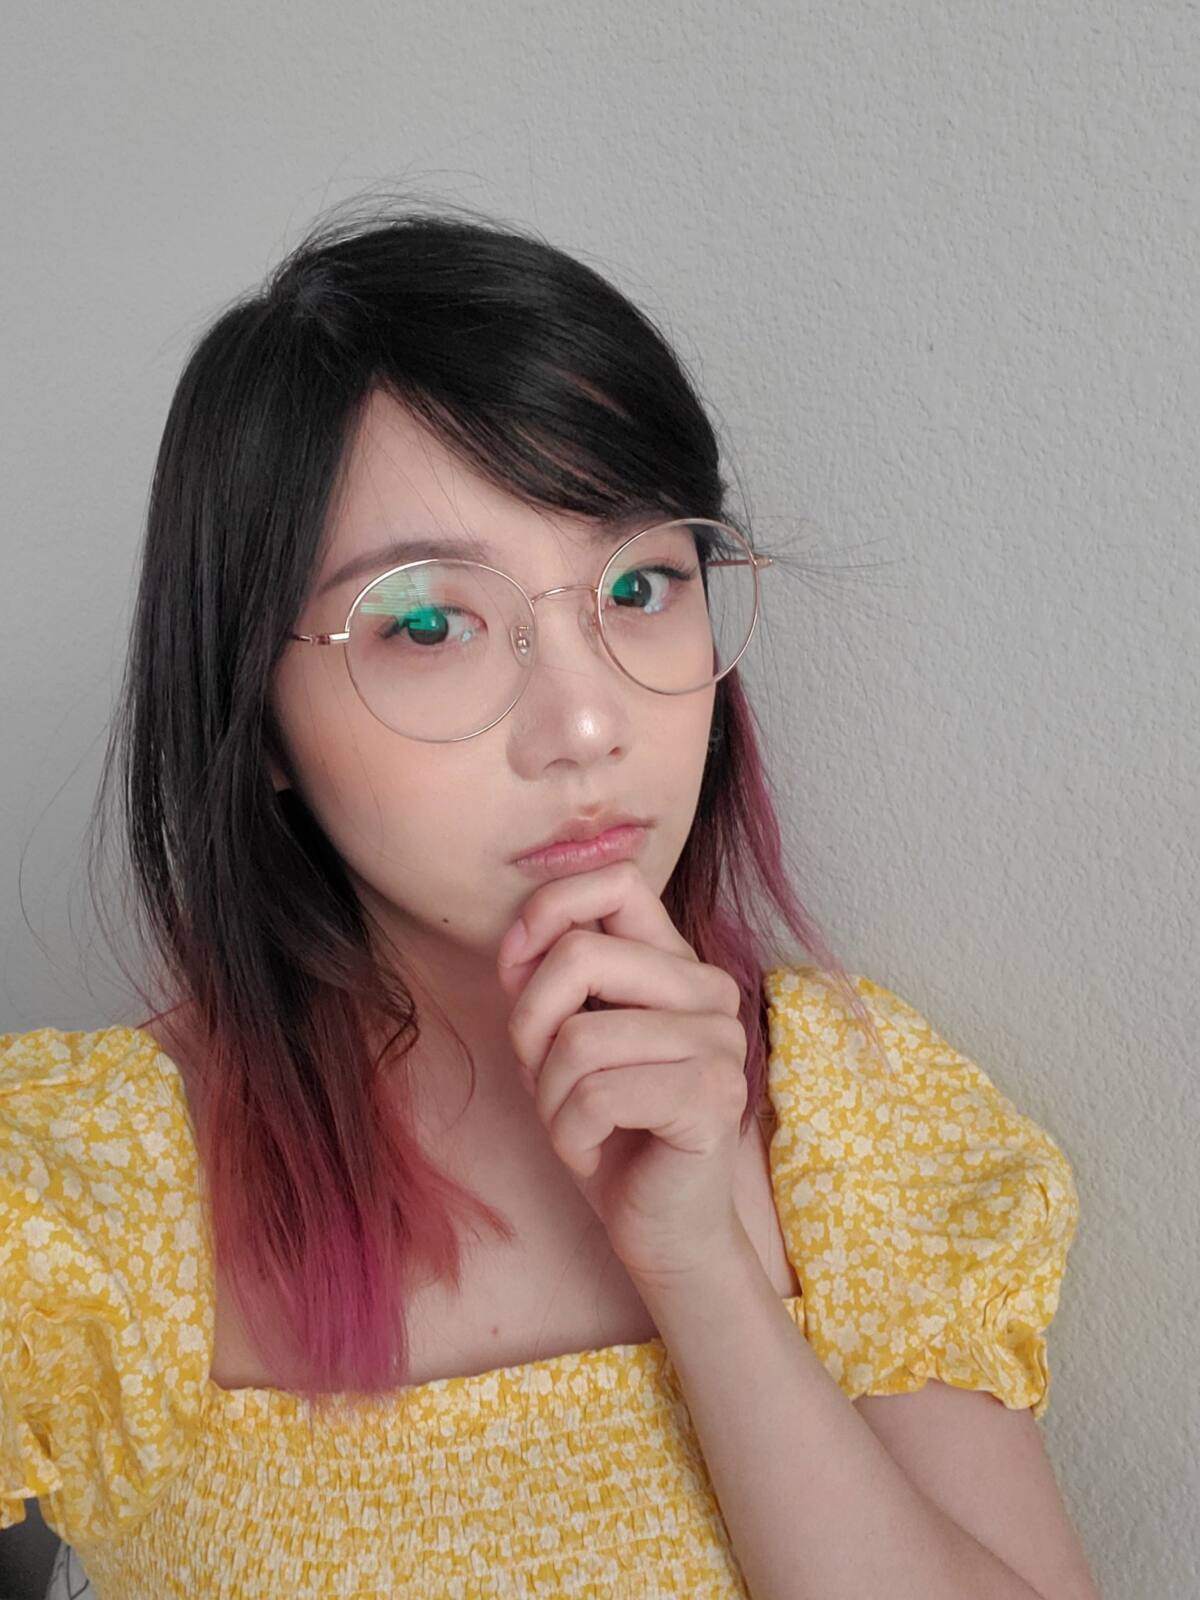 LilyPichu age, height, real name, art, relationship status, career